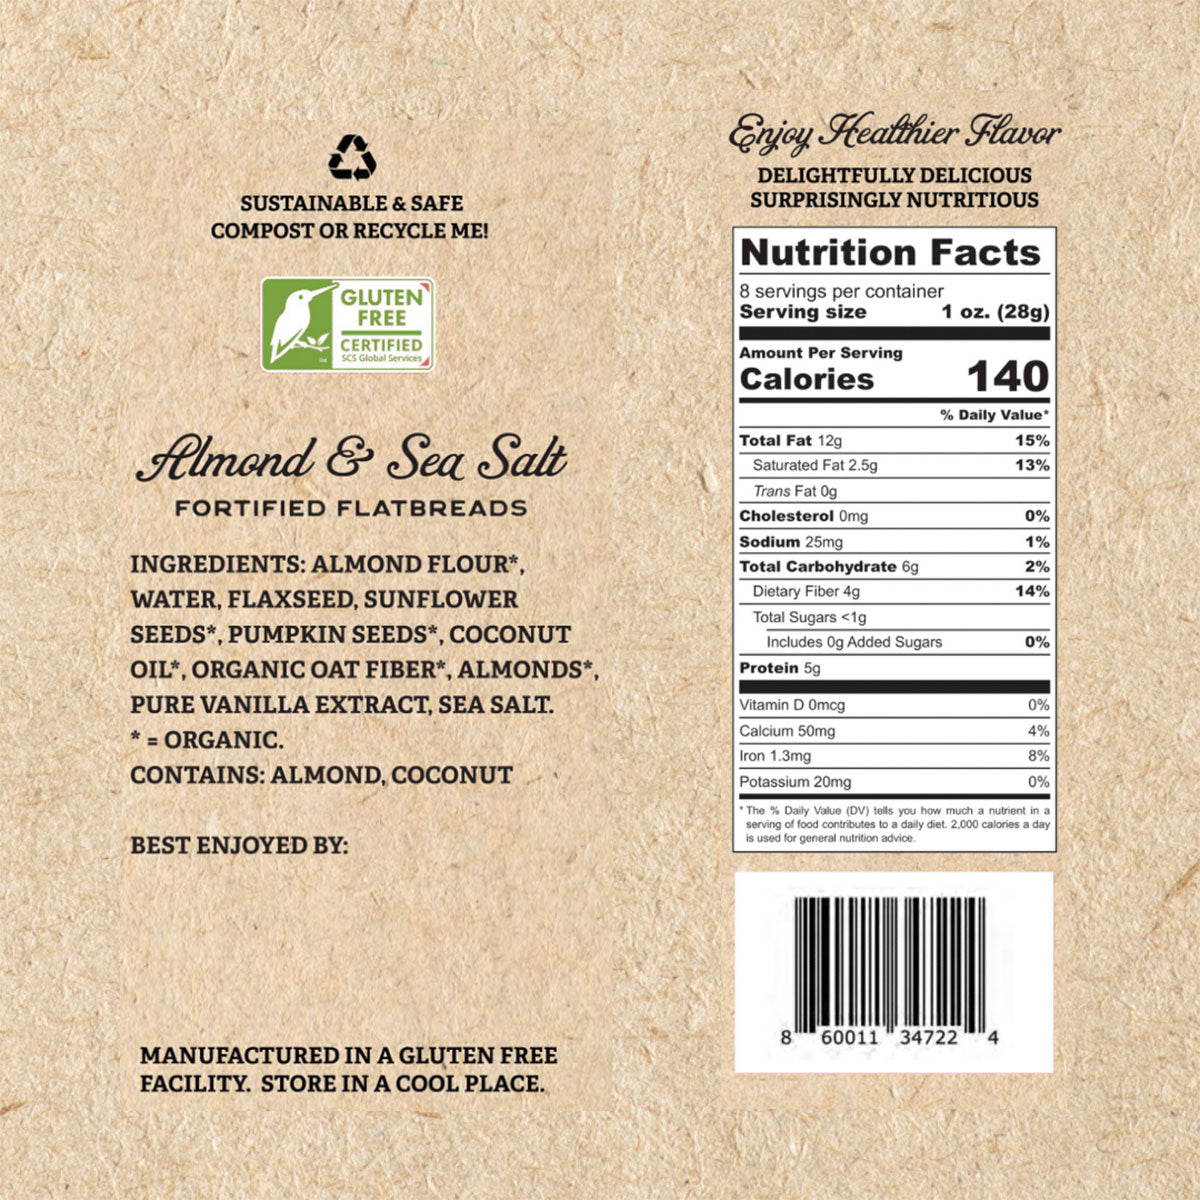 Graphic of the side of the Almond & Sea Salt fortified flatbread packaging ingredients and nutrition factsshop